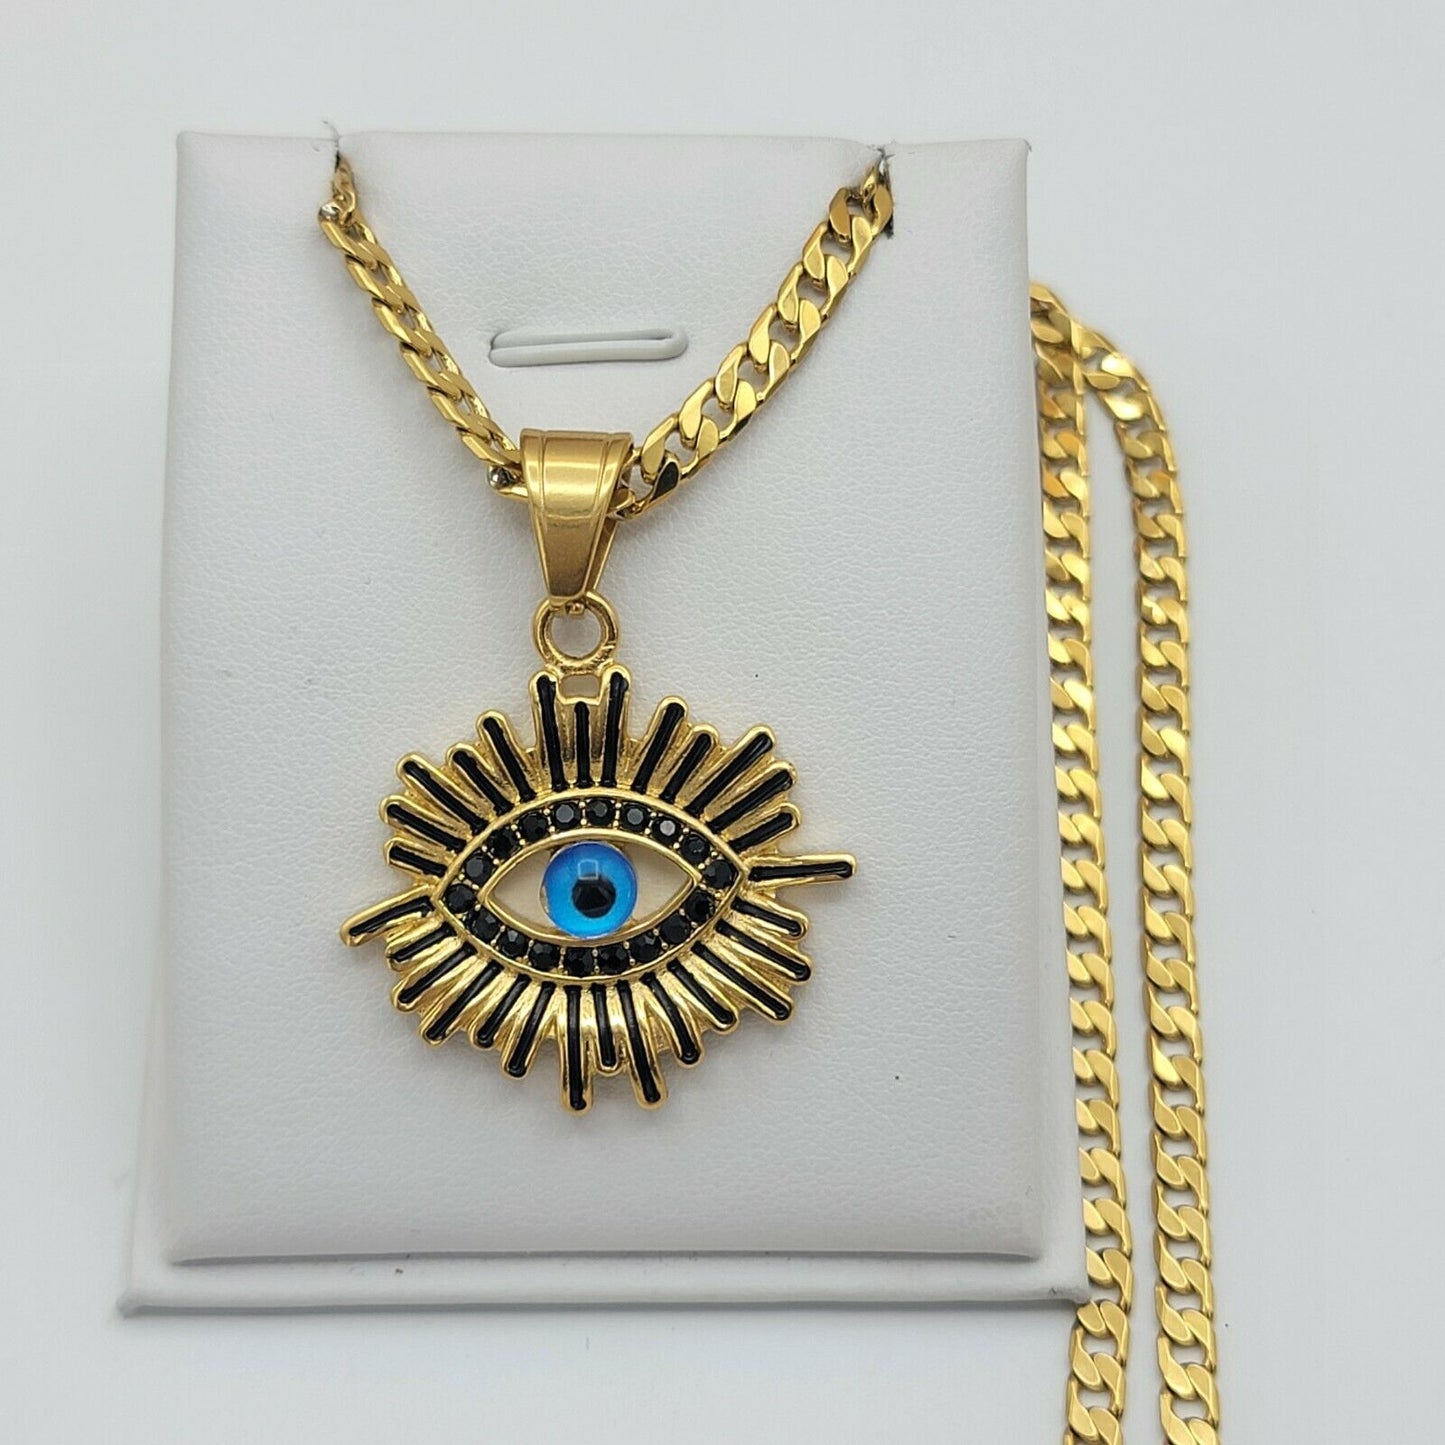 Necklaces - 24K Gold Plated. Sun & Eye Pendant Chain